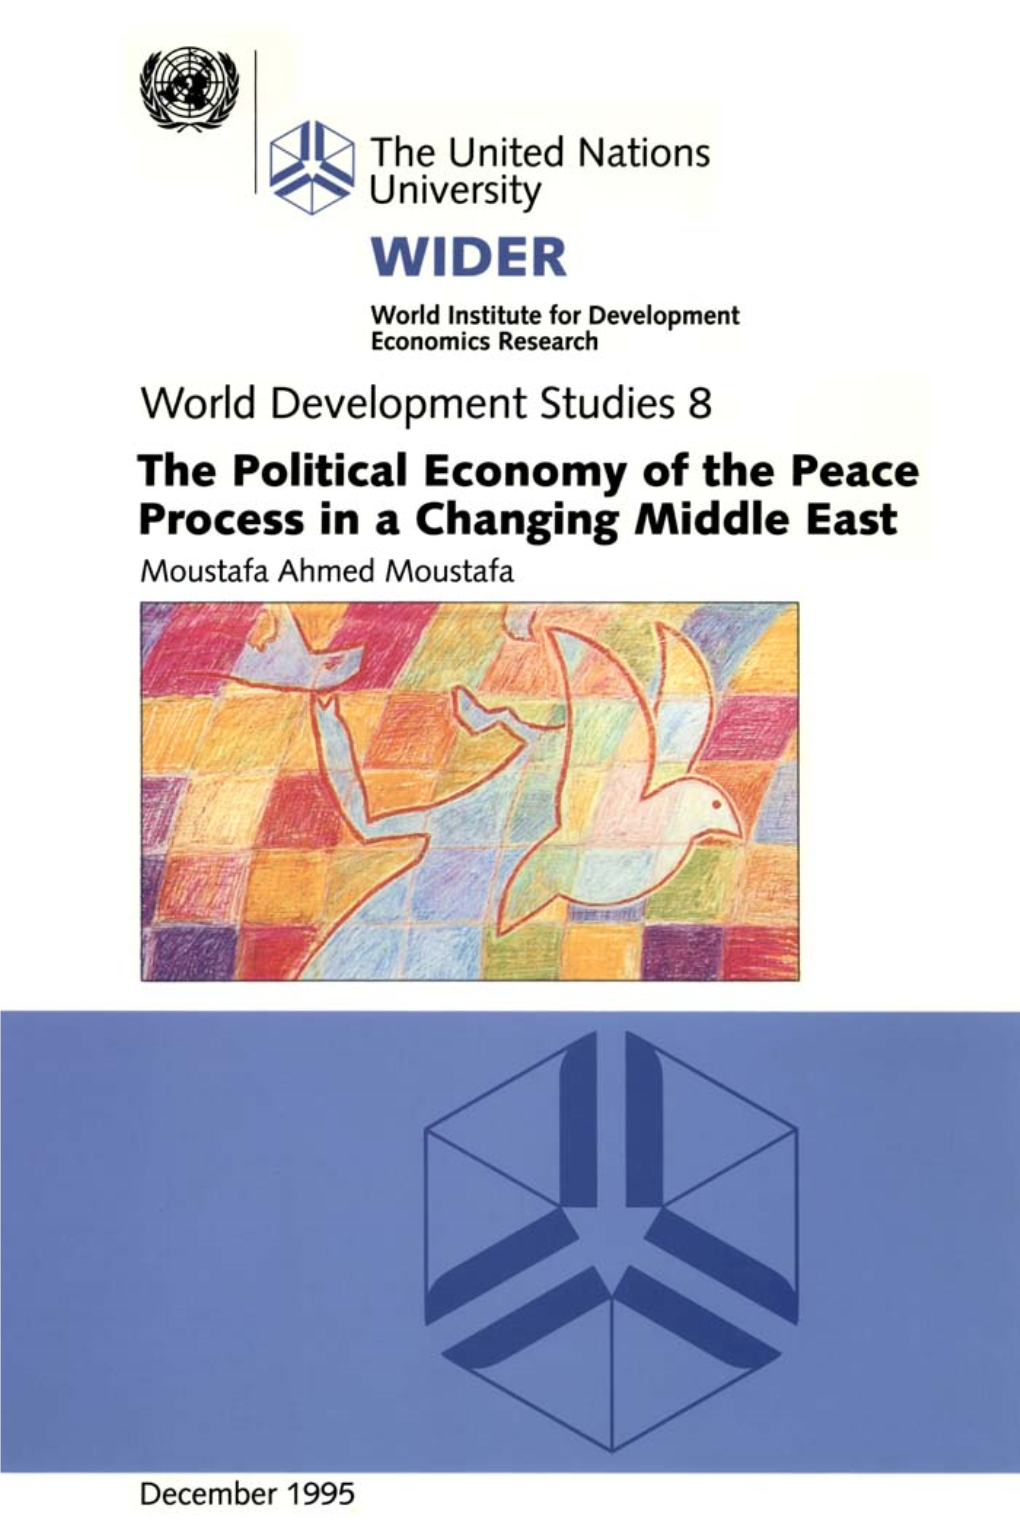 The Political Economy of the Peace Process in a Changing Middle East